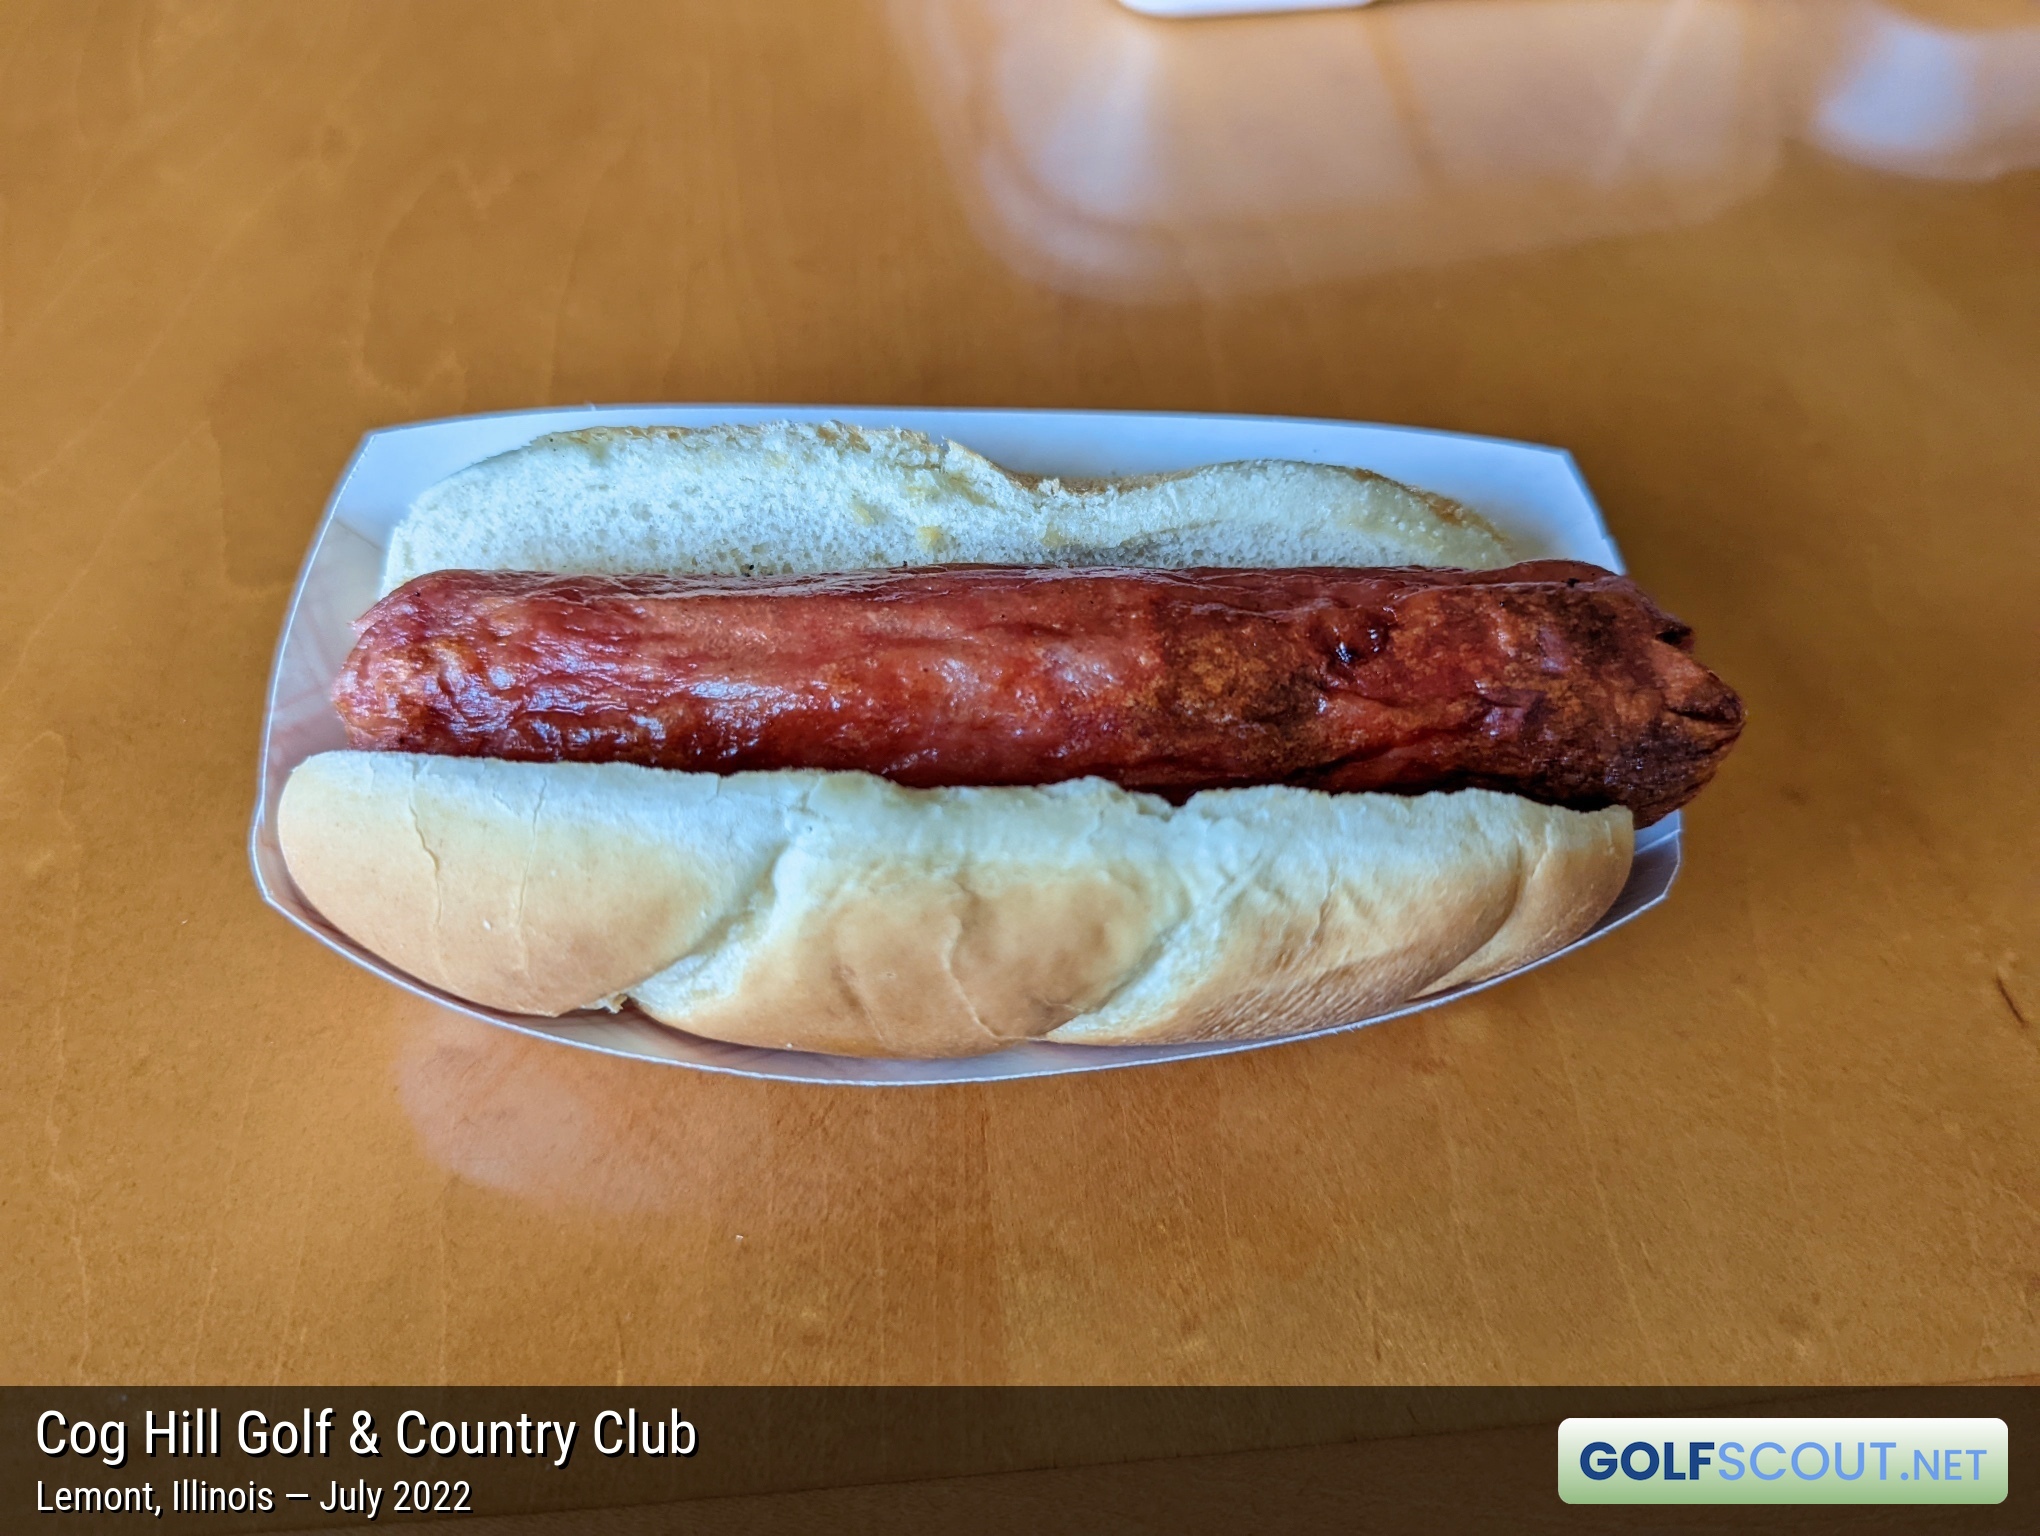 Photo of the food and dining at Cog Hill Golf & Country Club in Lemont, Illinois. Photo of the hot dog at Cog Hill Golf & Country Club in Lemont, Illinois.